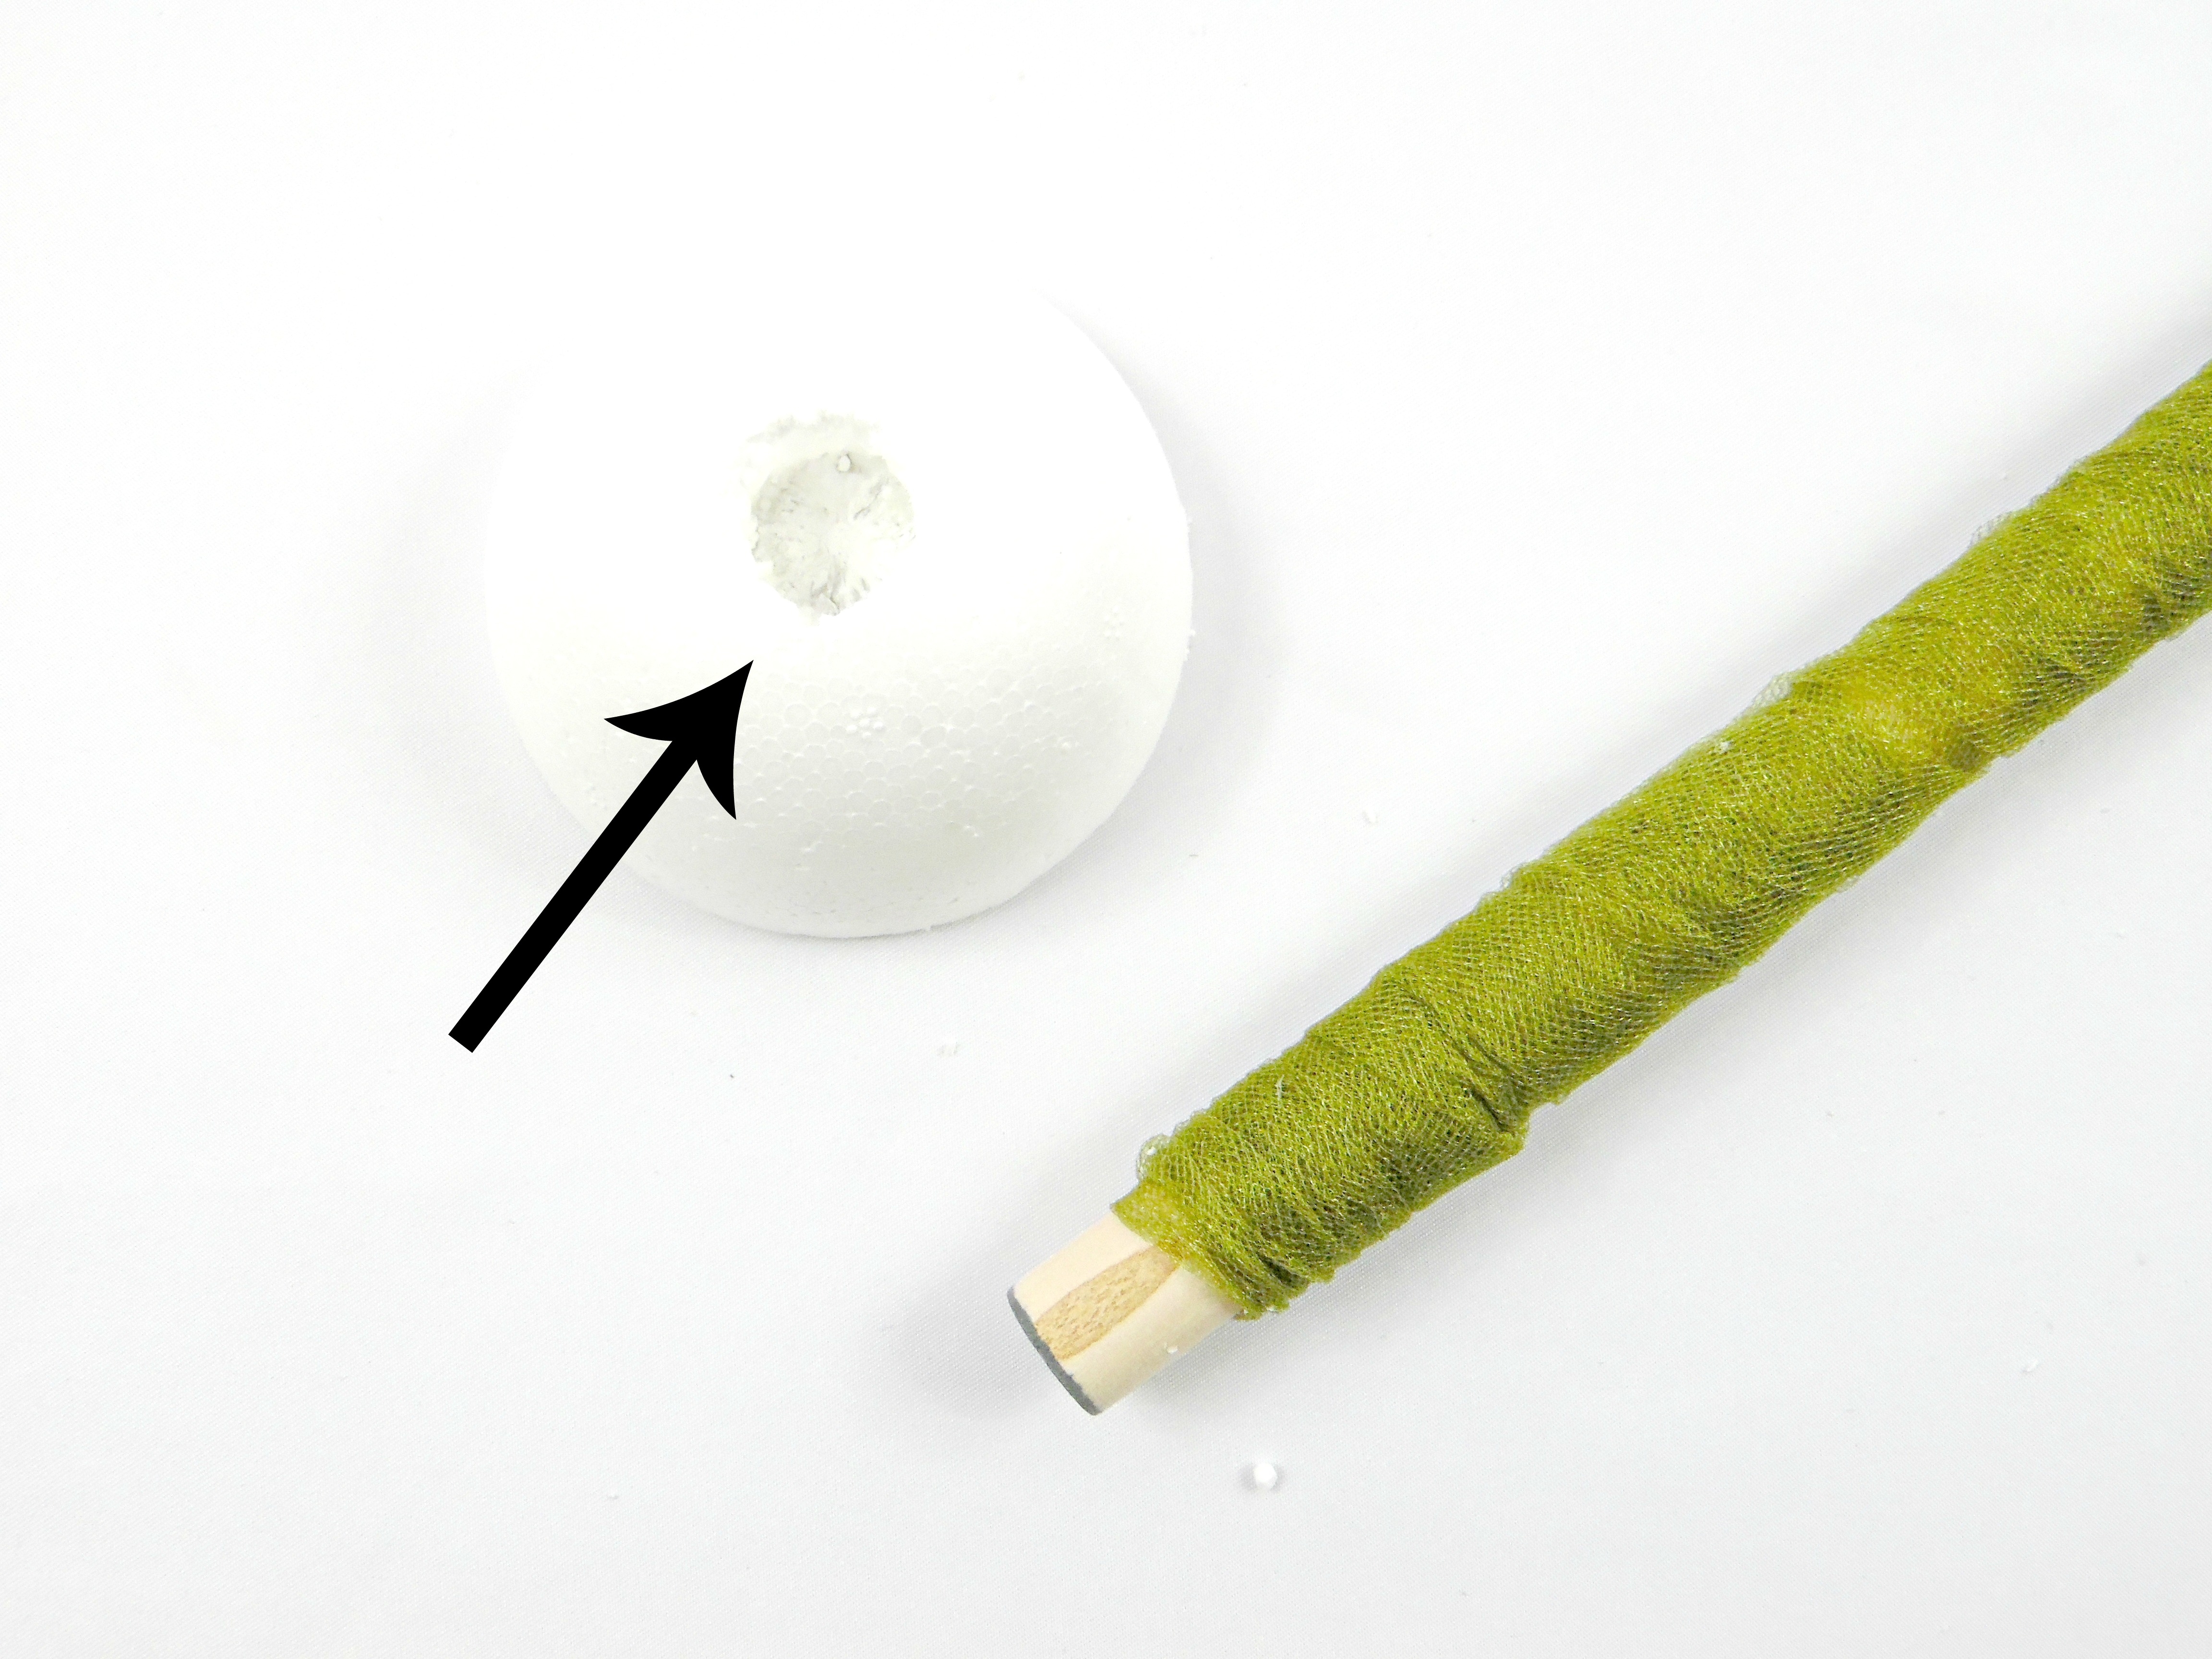 A foam ball, cut in half, has a deep dowel-sized hole in its center. Using the wooden dowel to carve out this hole is step 3 in the giant paper flower stem tutorial. 